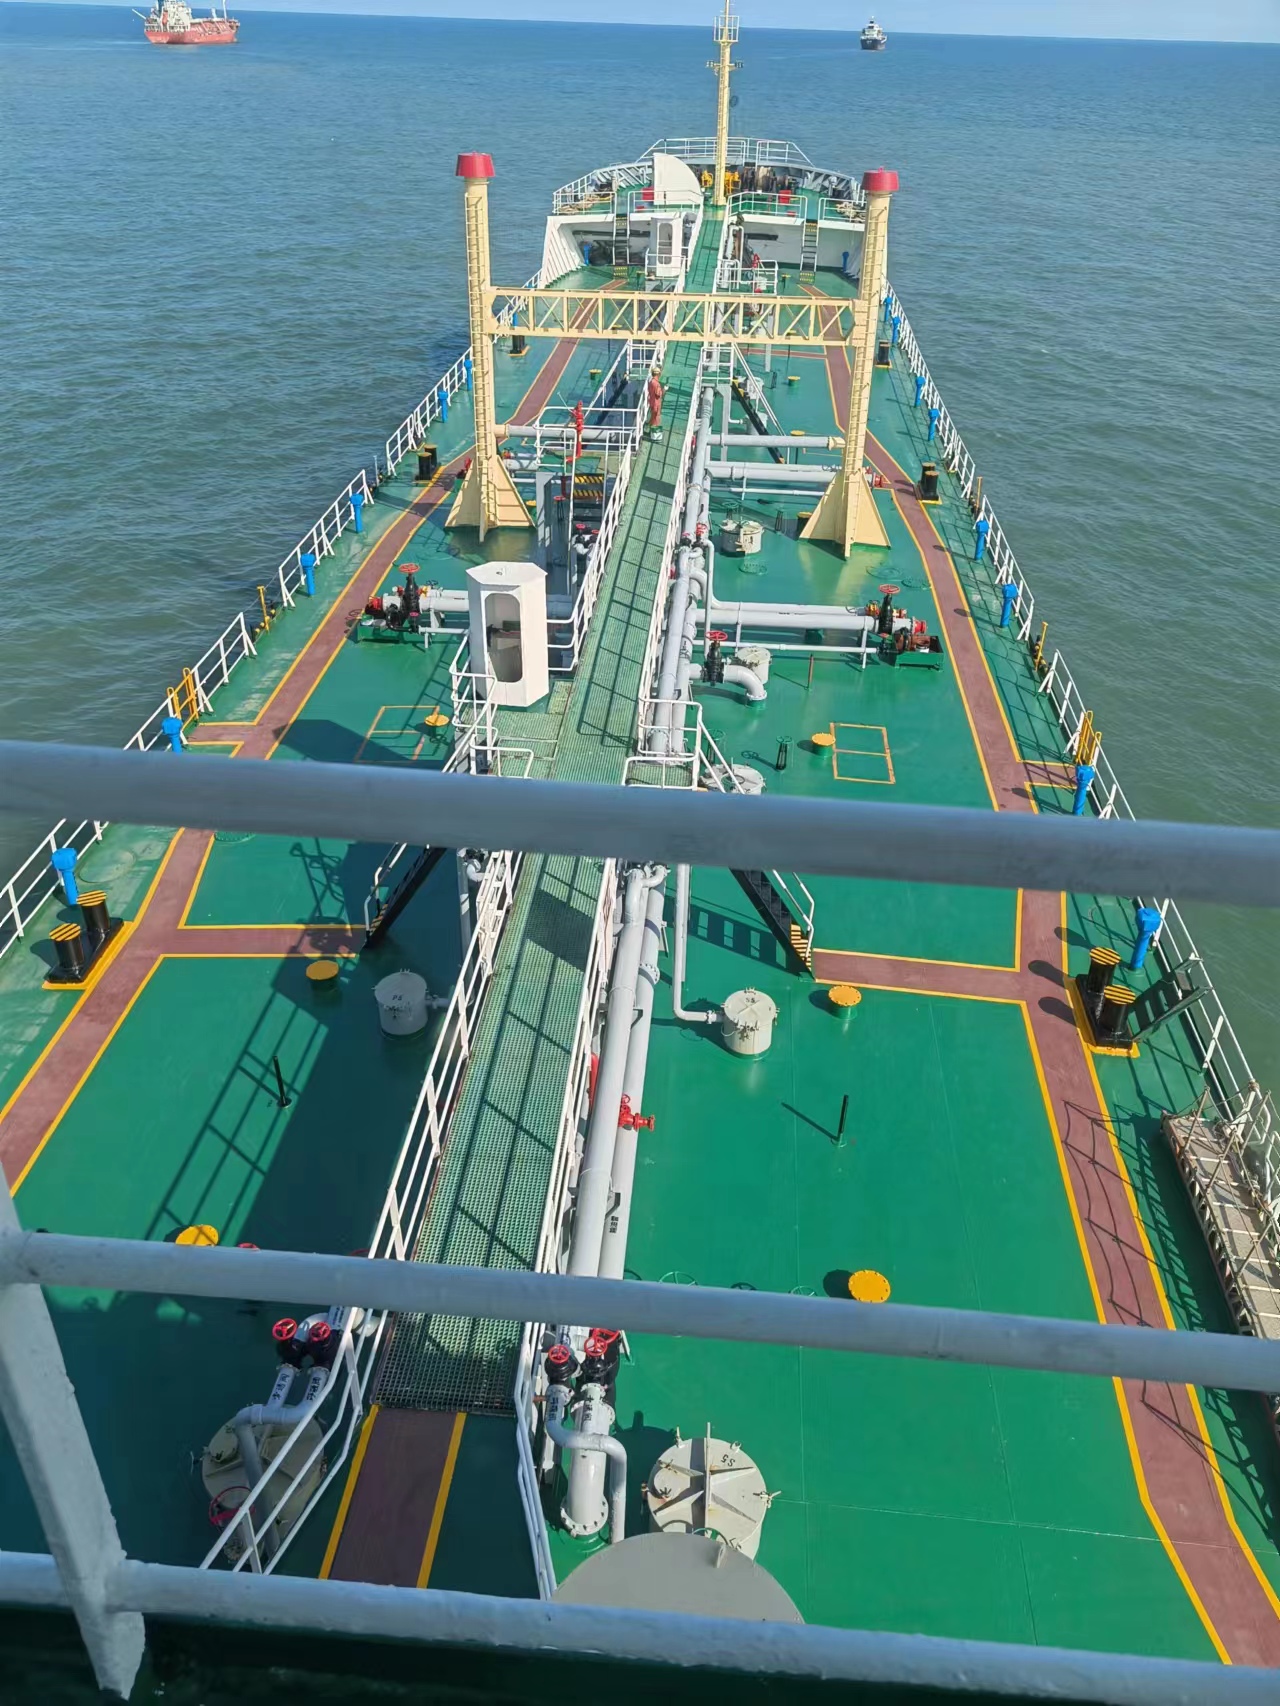 6600 T Product Oil Tanker For Sale